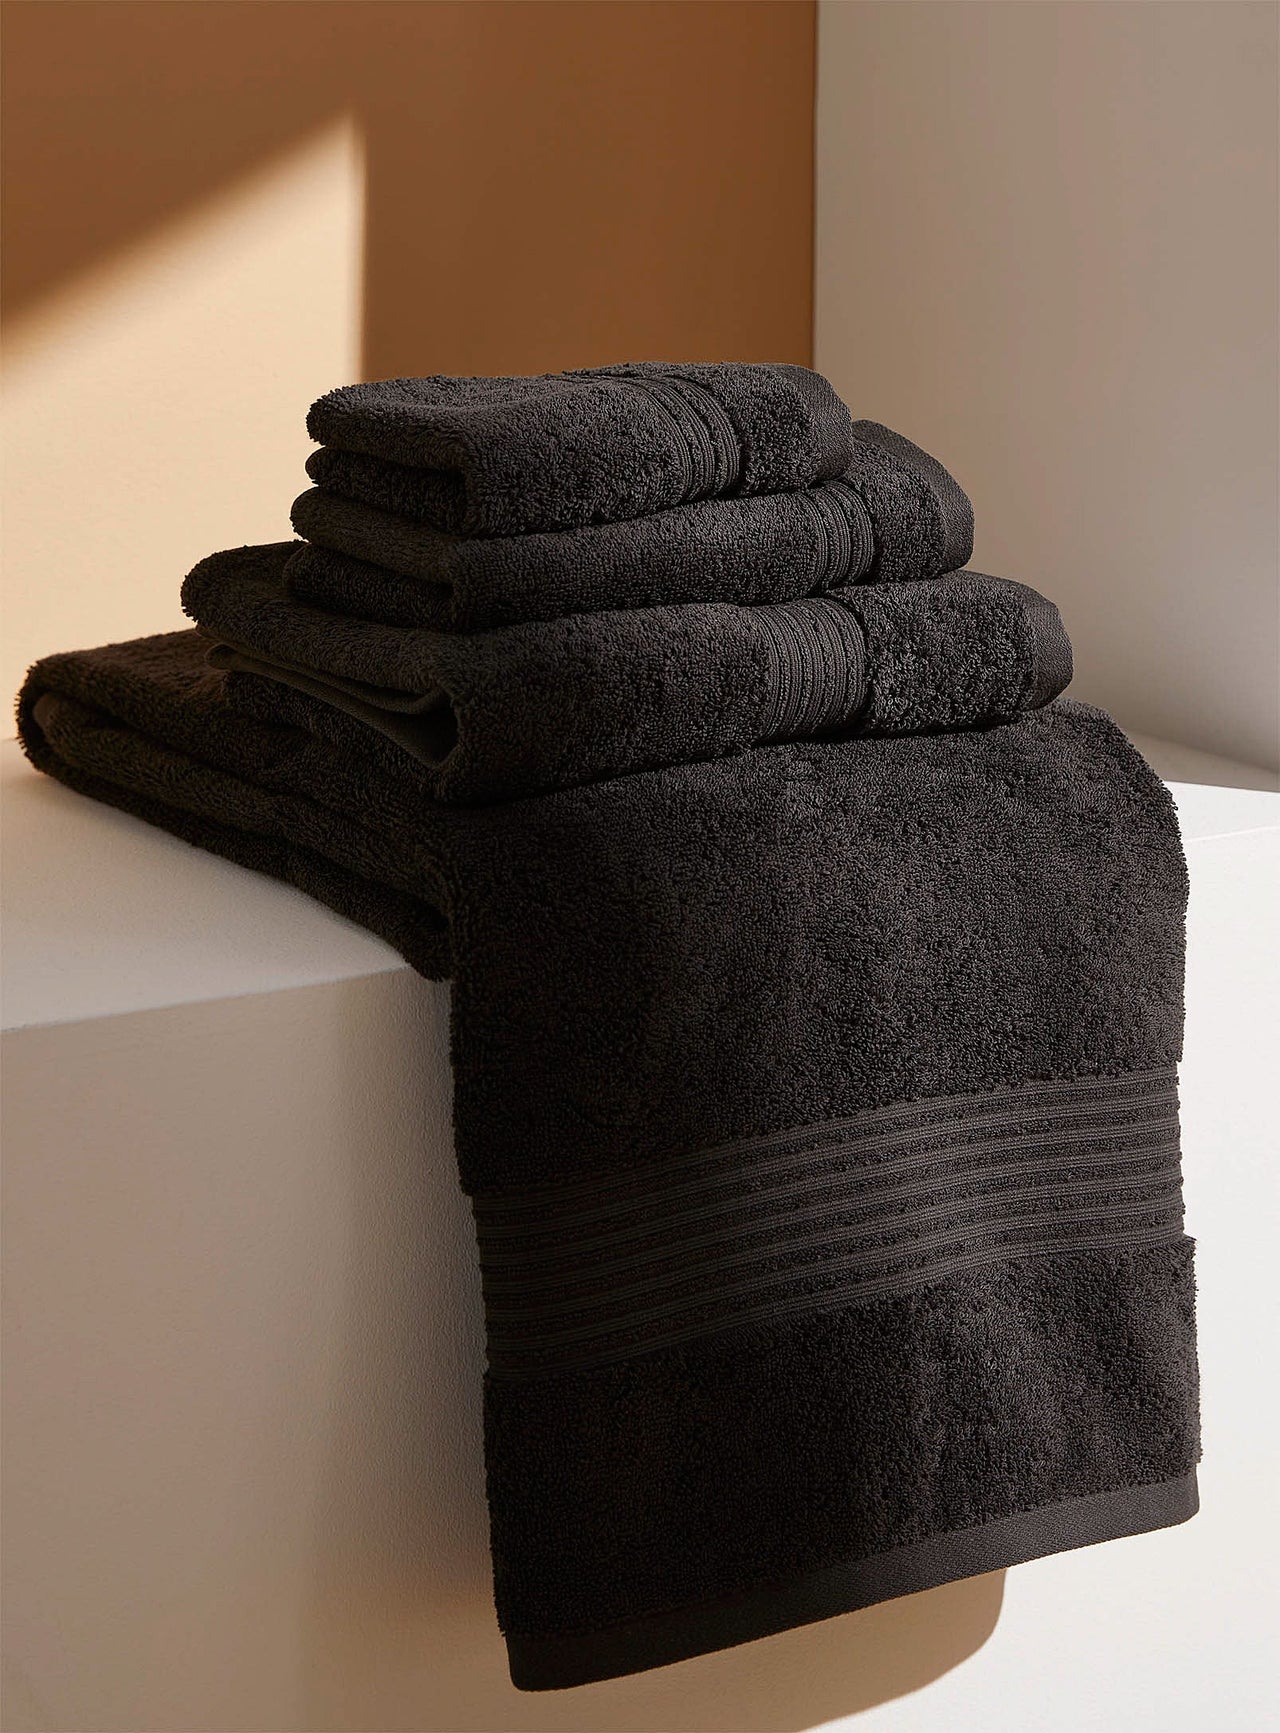 Airy cotton towels